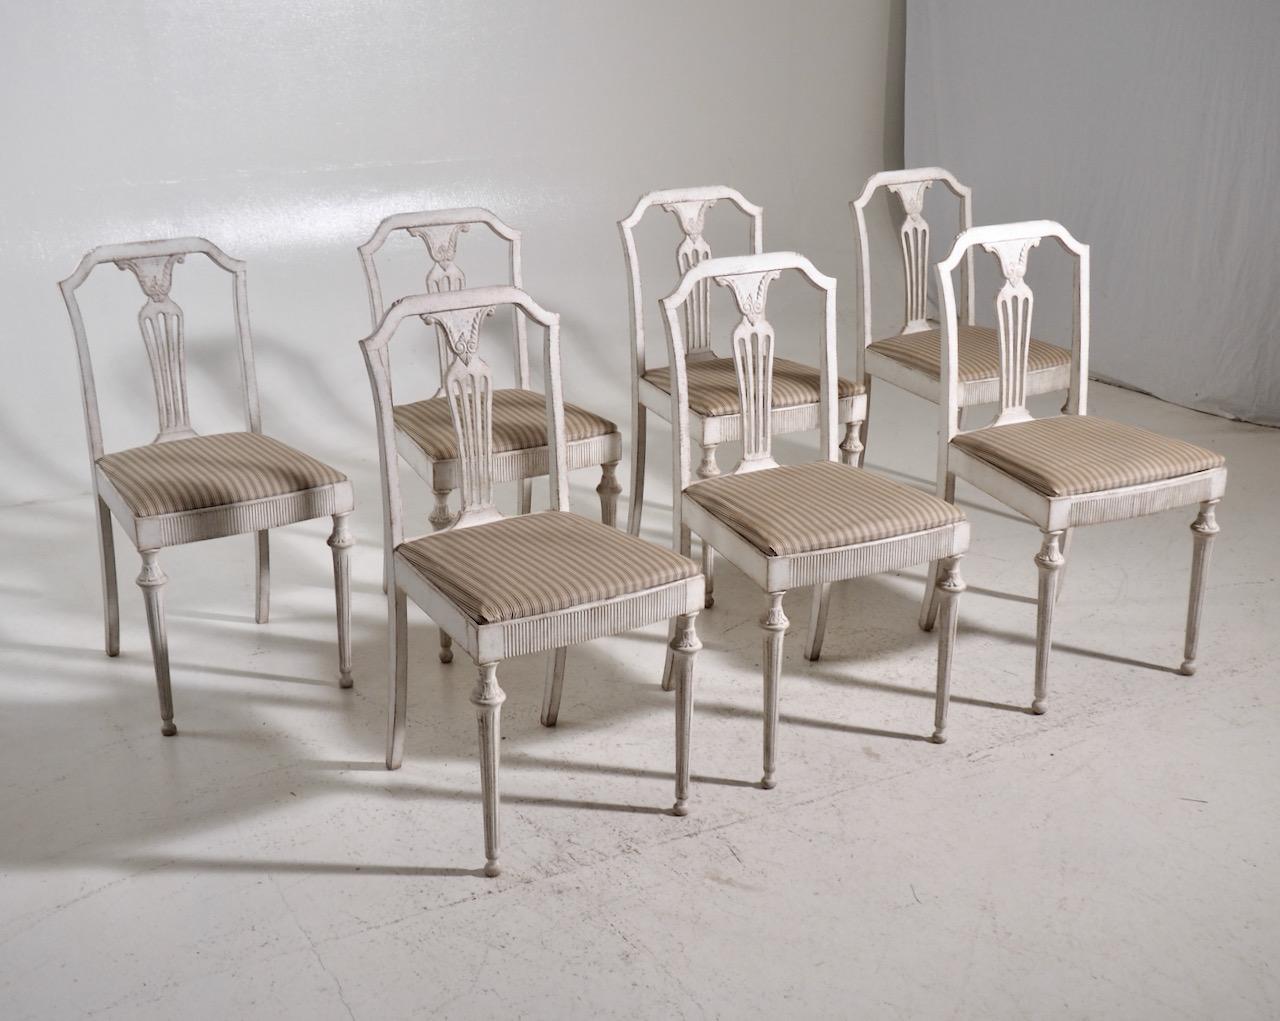 Set of seven chairs, Gustavian style, 20th century.